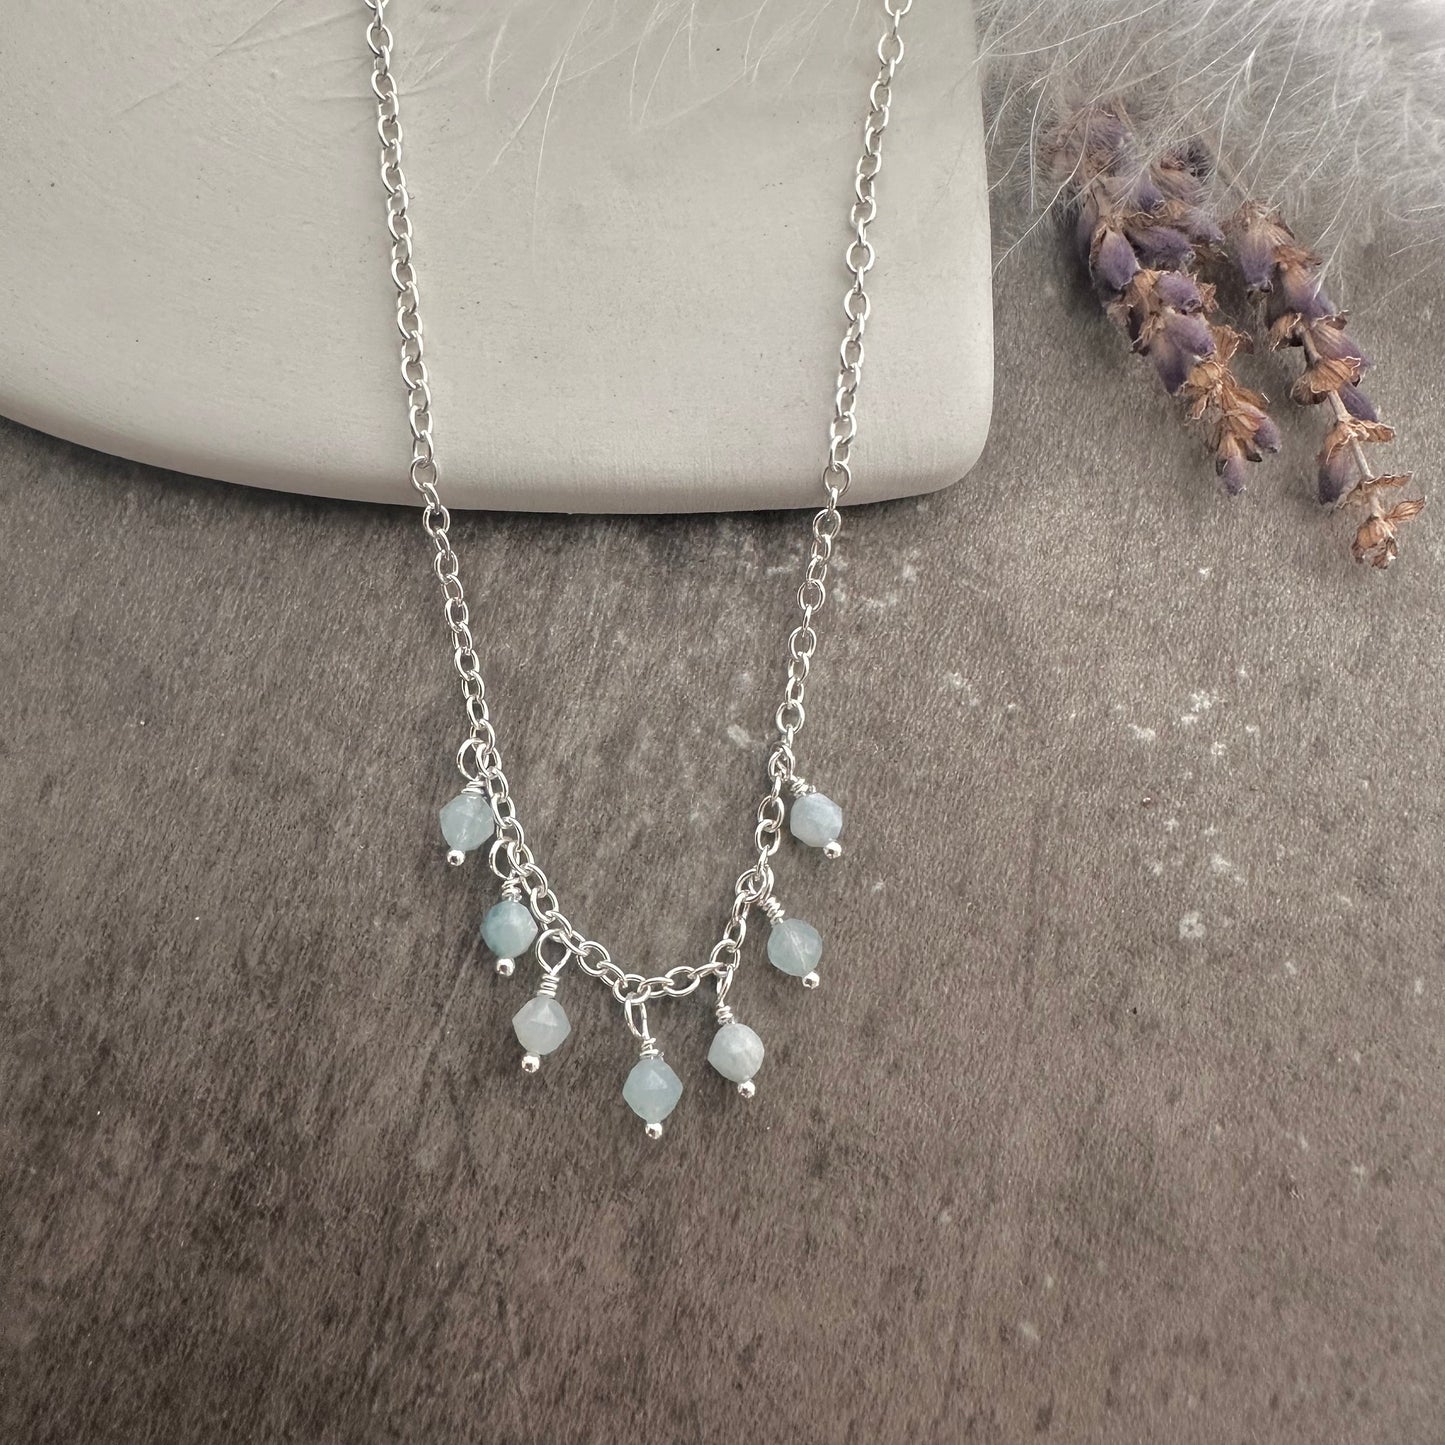 Dainty Aquamarine drops necklace sterling silver, March birthstone jewellery